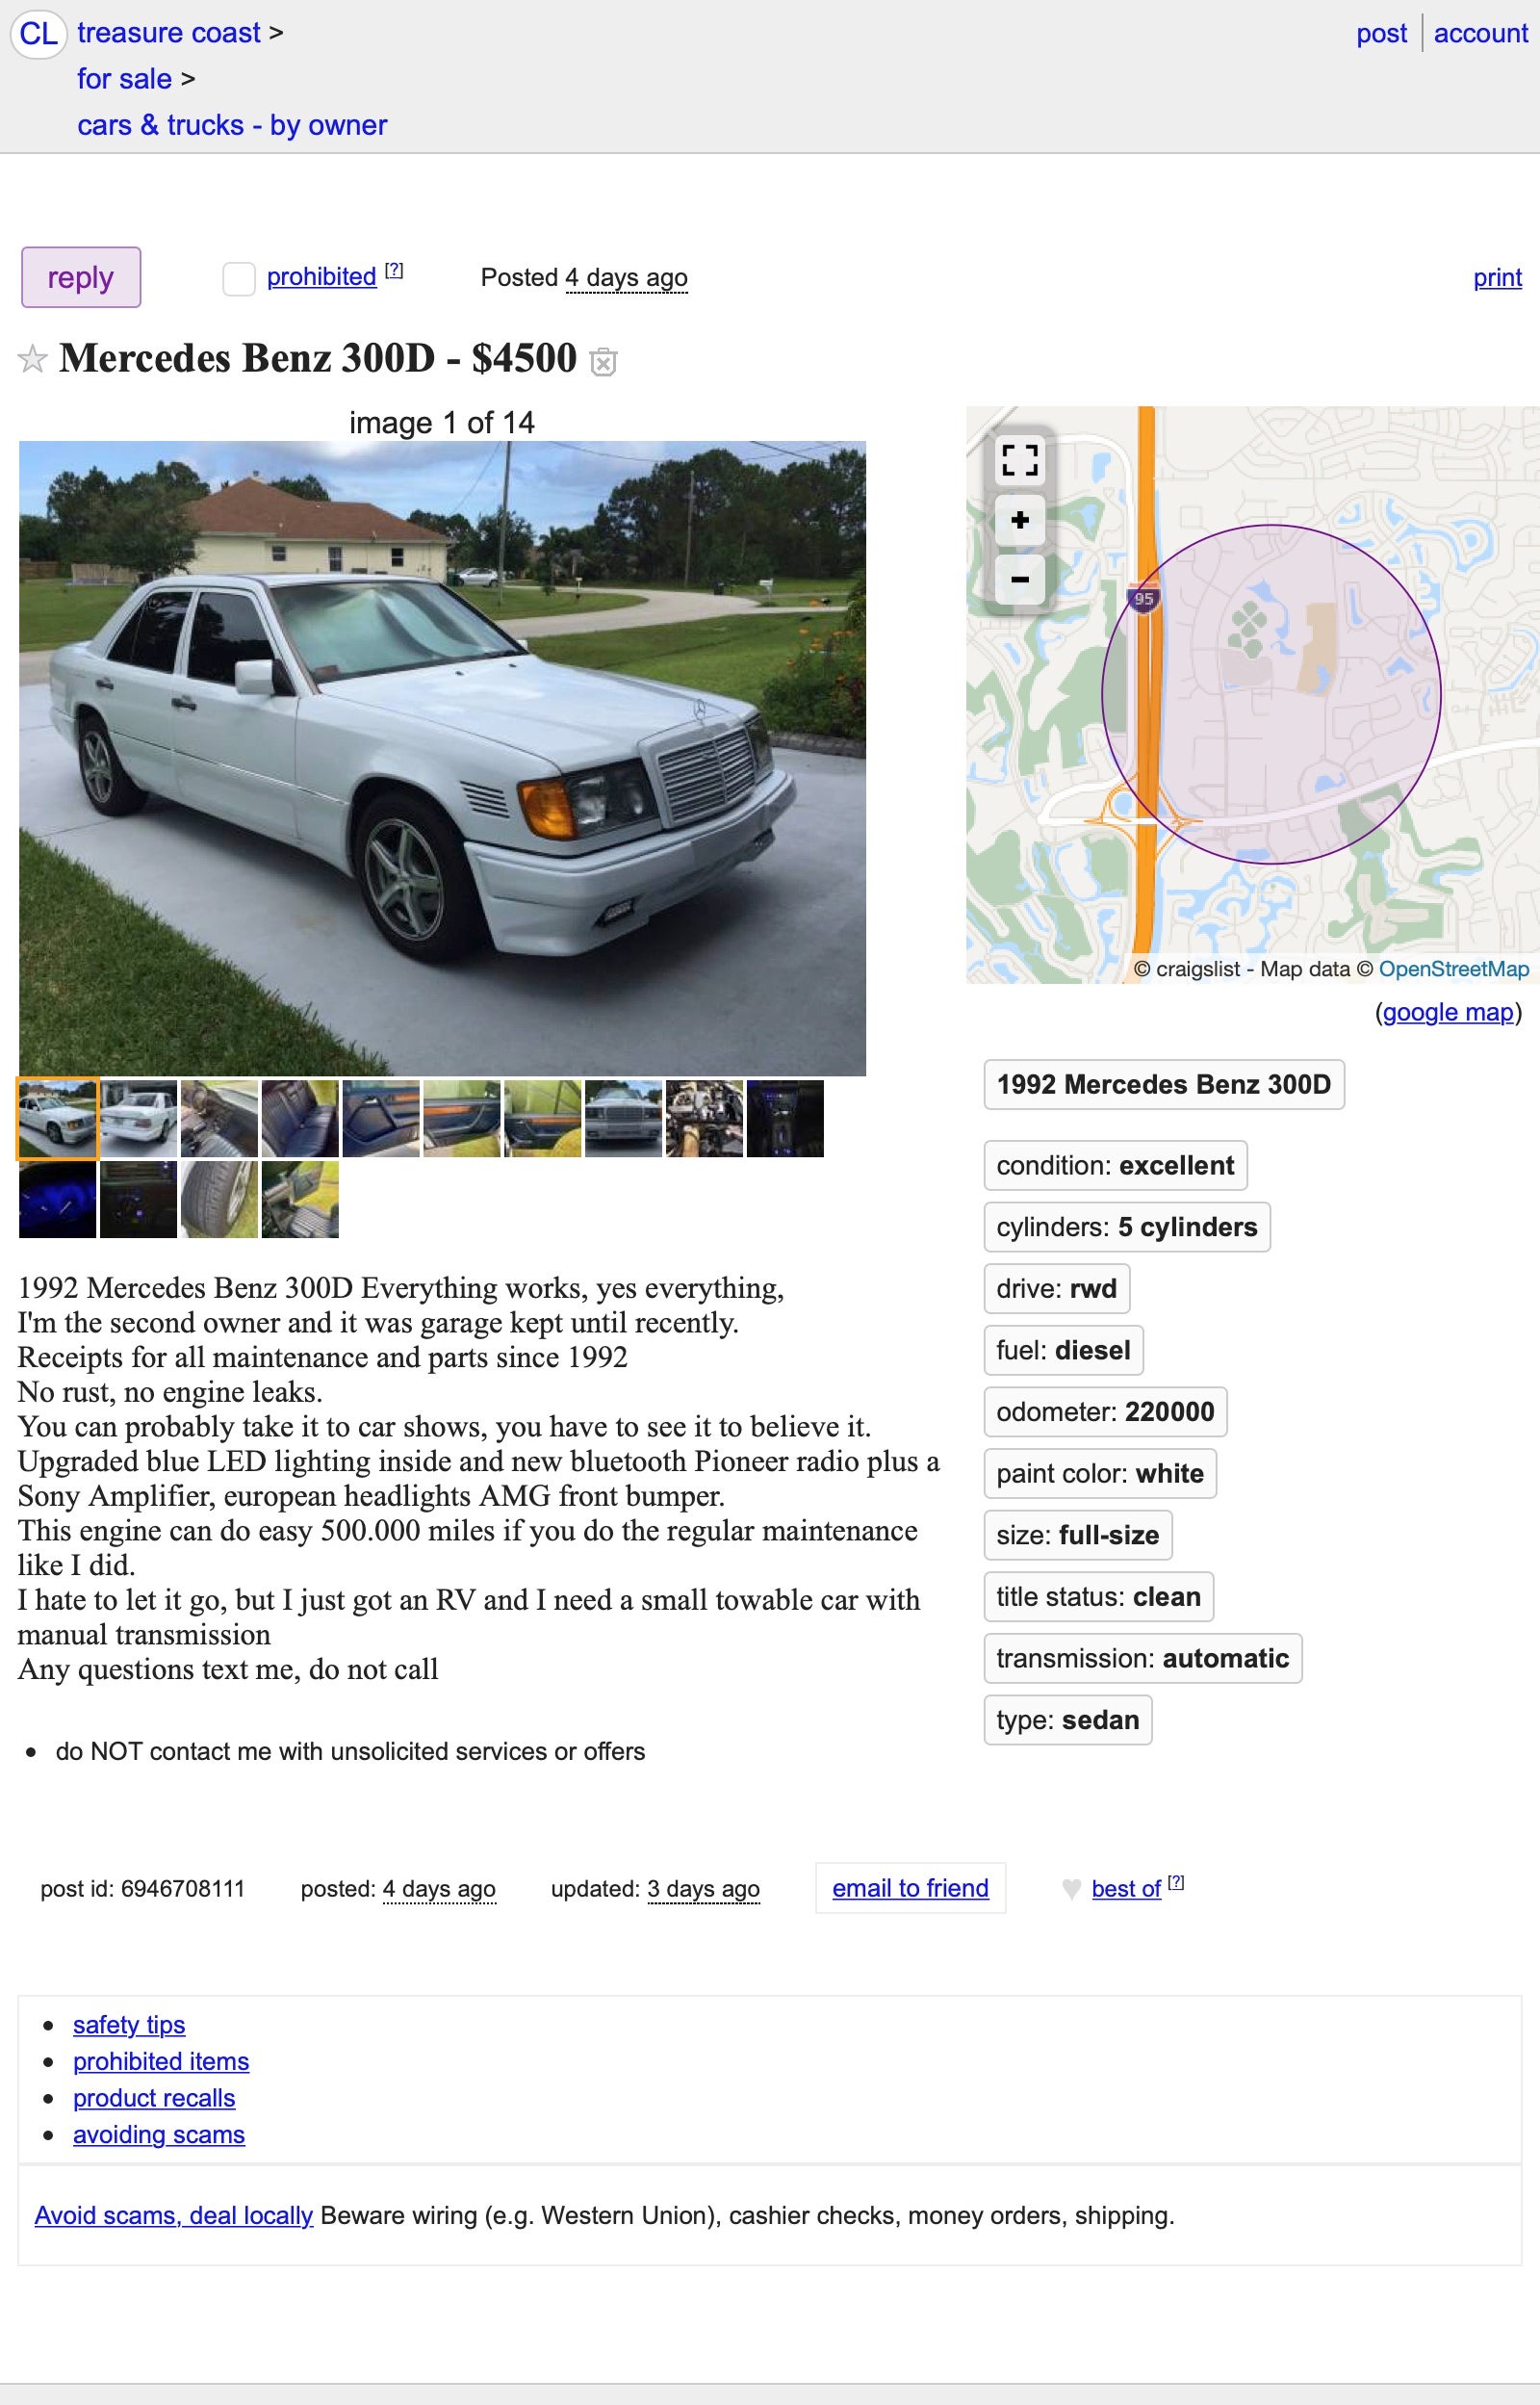 At $4,500, Could This High-Mileage 1992 Mercedes 300D ...